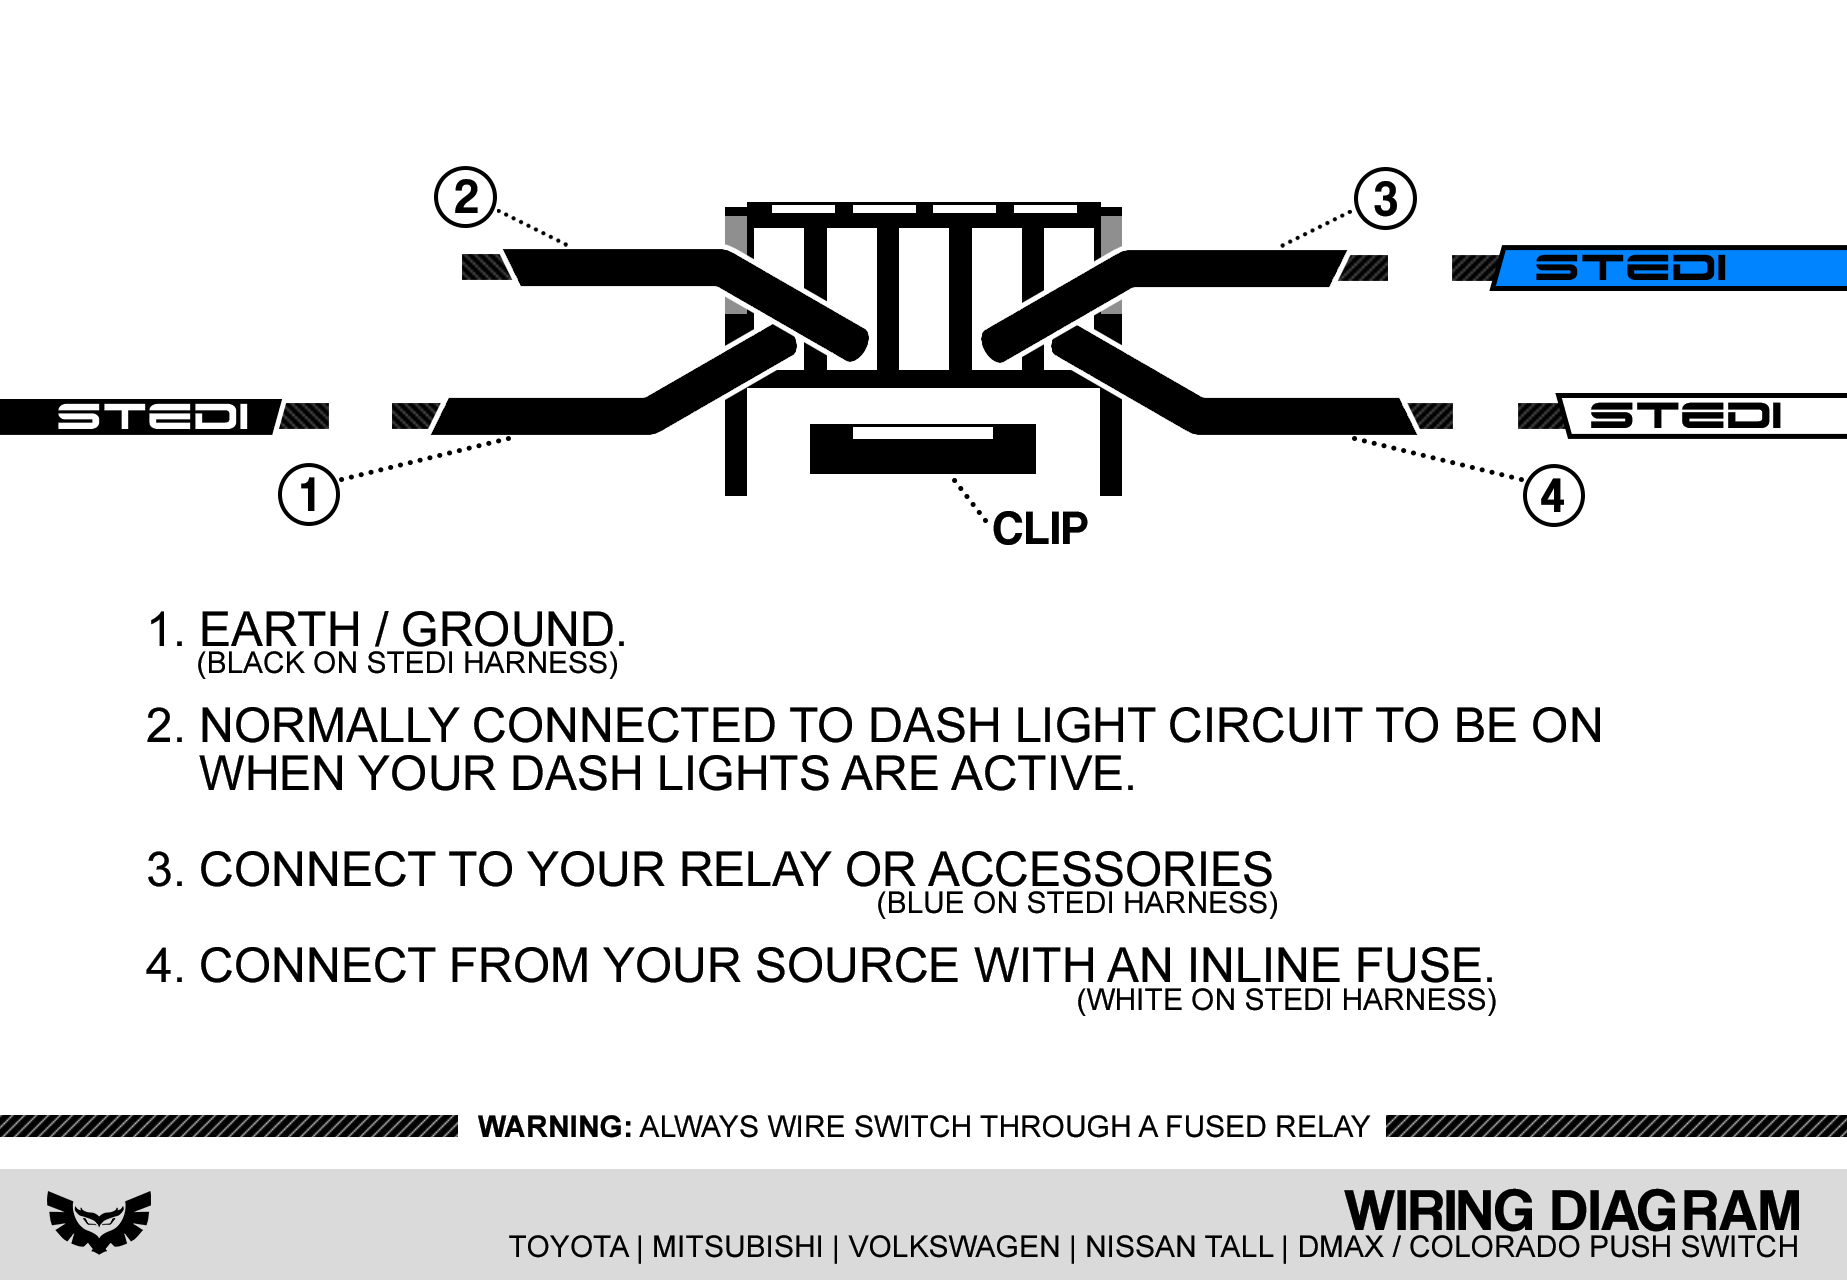 Wiring Diagram For Led Light Bar To High Beam from support.stedi.com.au